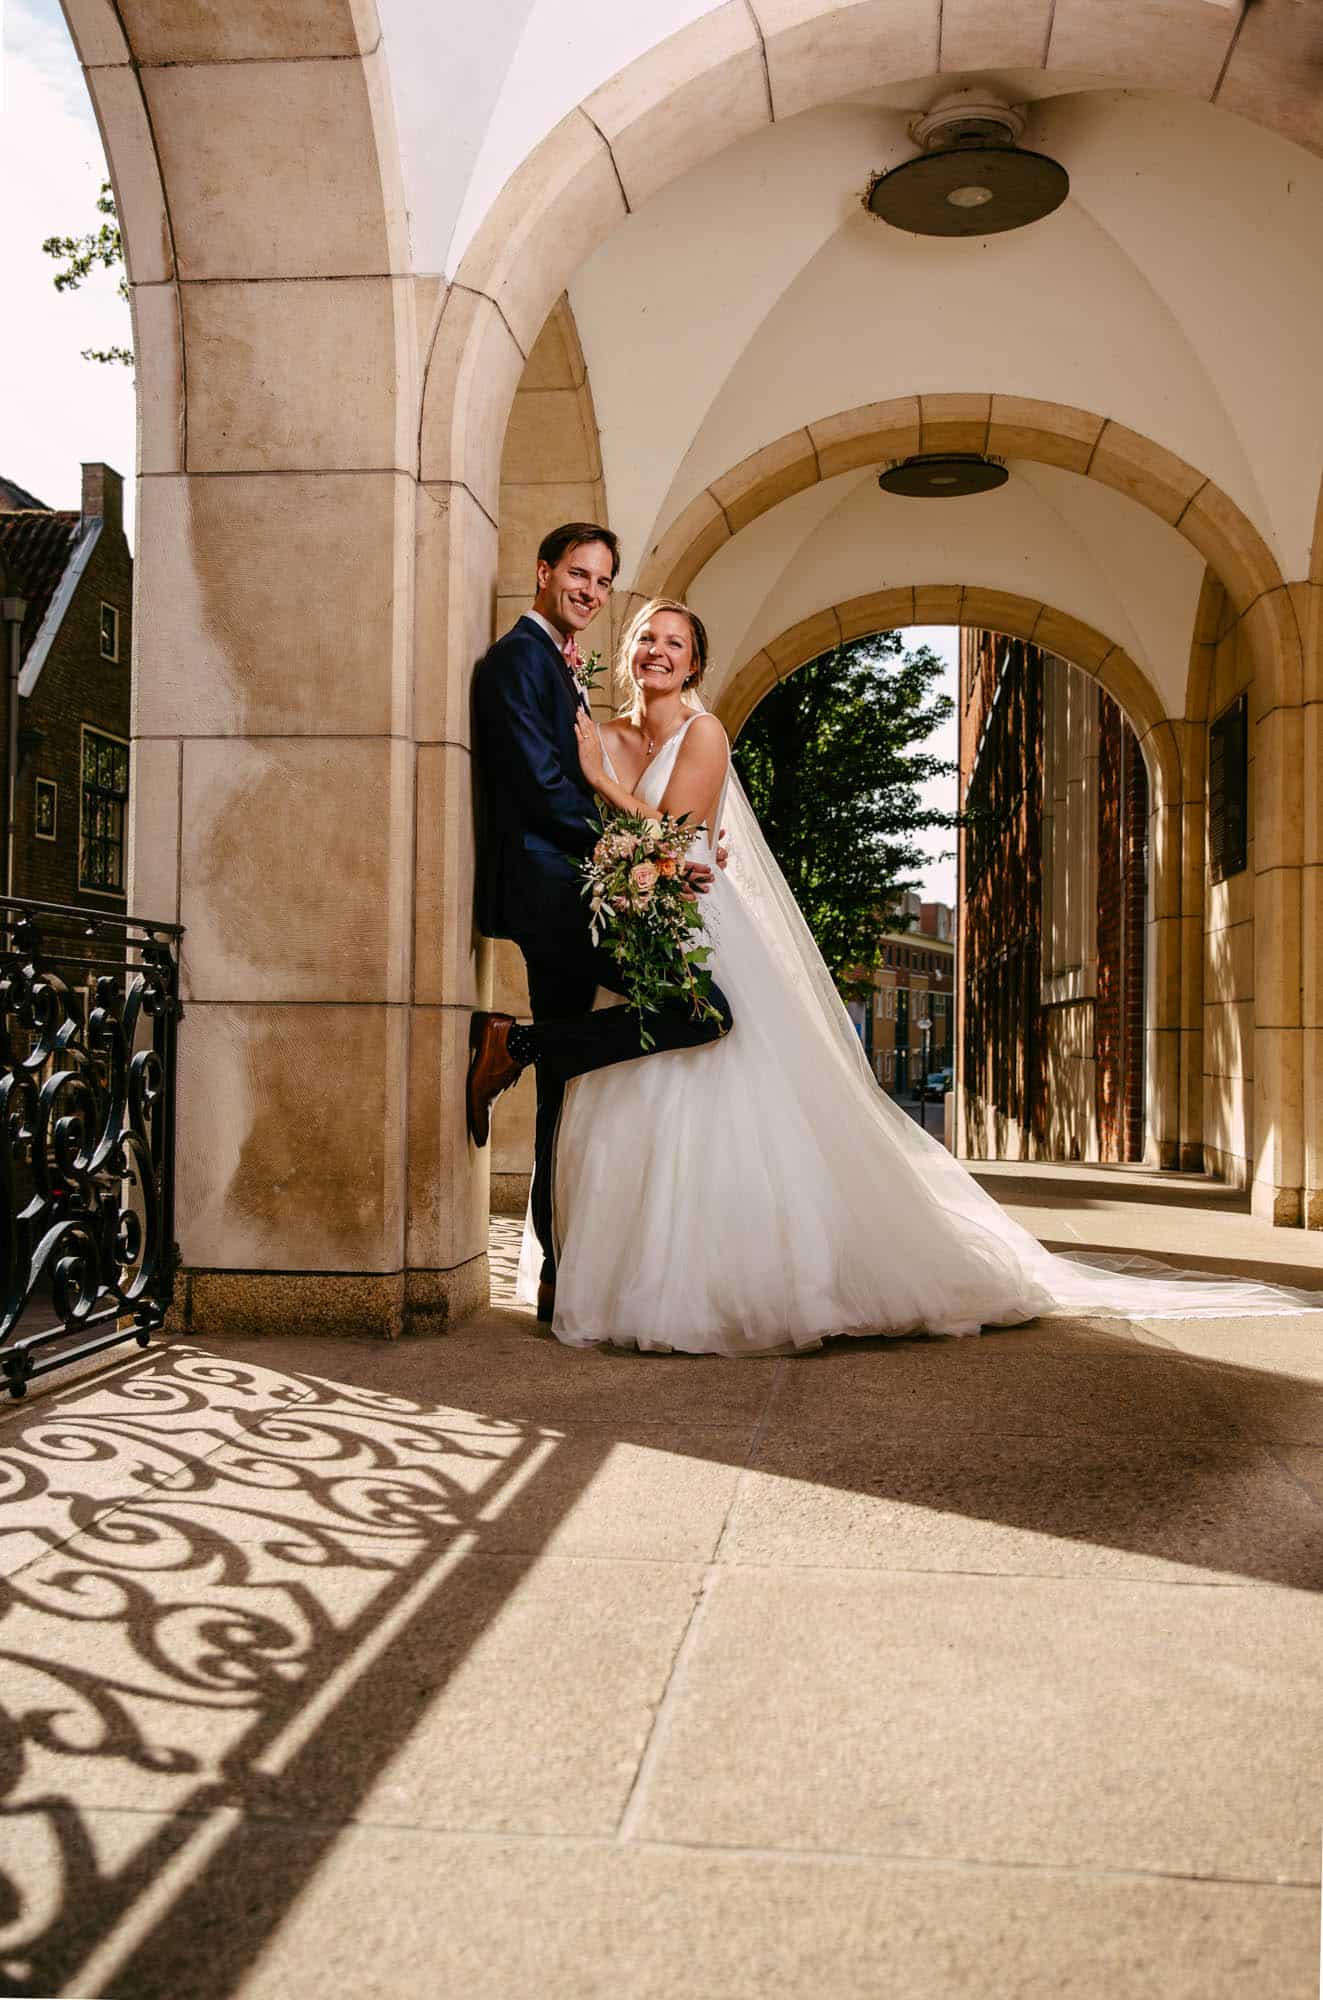 A bride and groom pose under an archway.